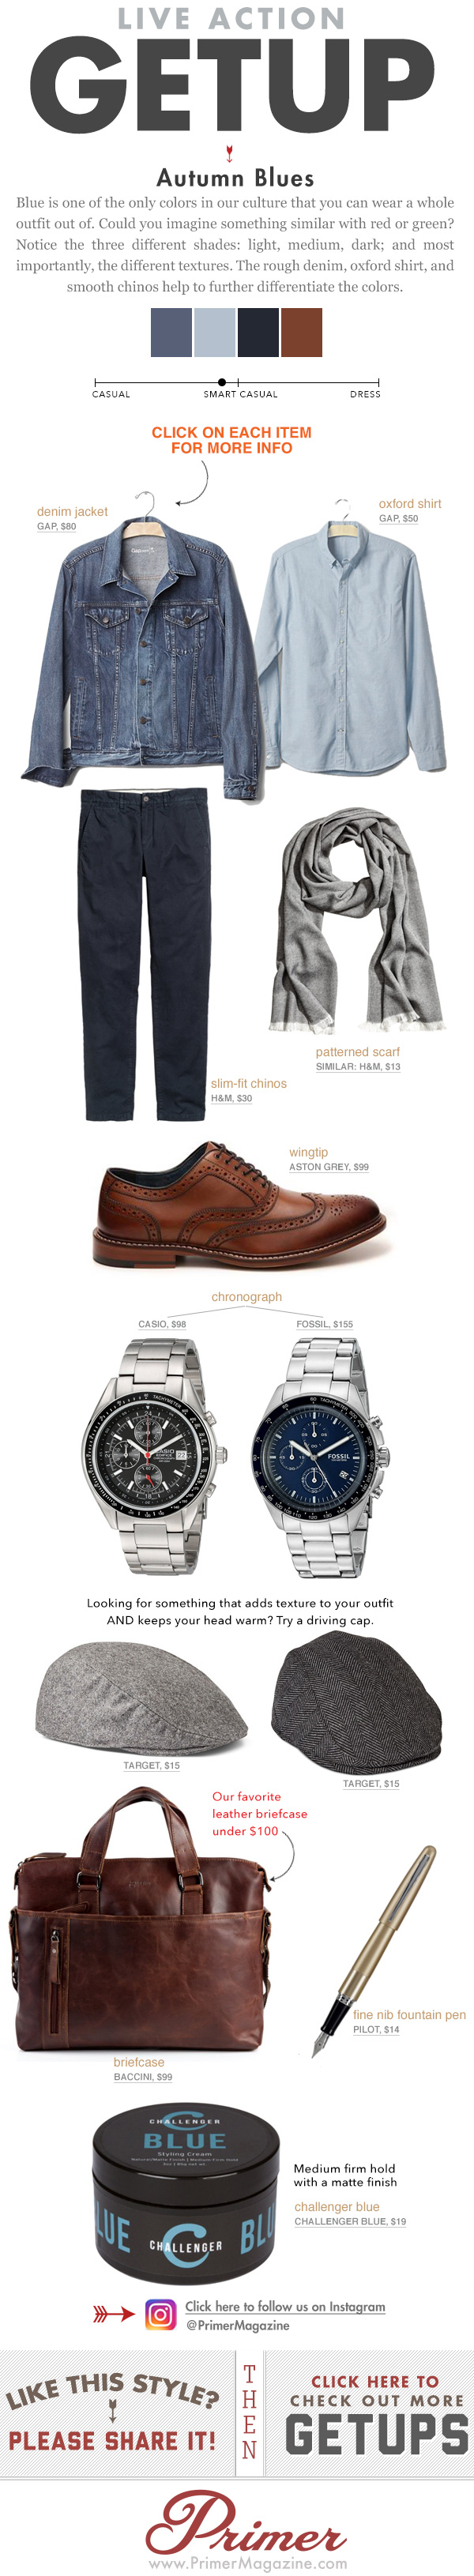 The Getup Autumn Blues outfit inspiration featuring denim jacket and wingtip shoes